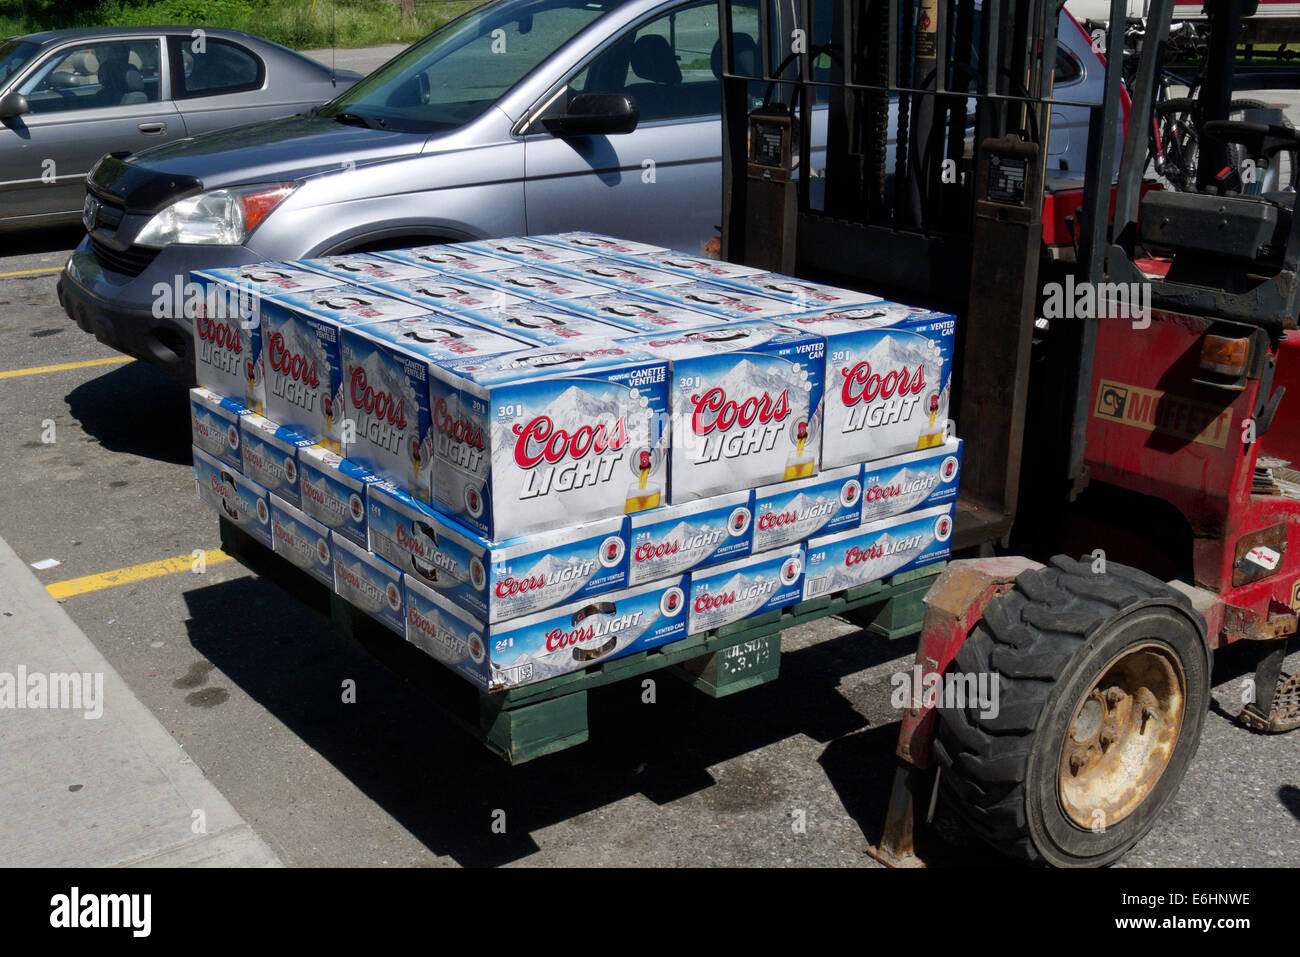 Boxes of Coors Light beer on a forklift Stock Photo